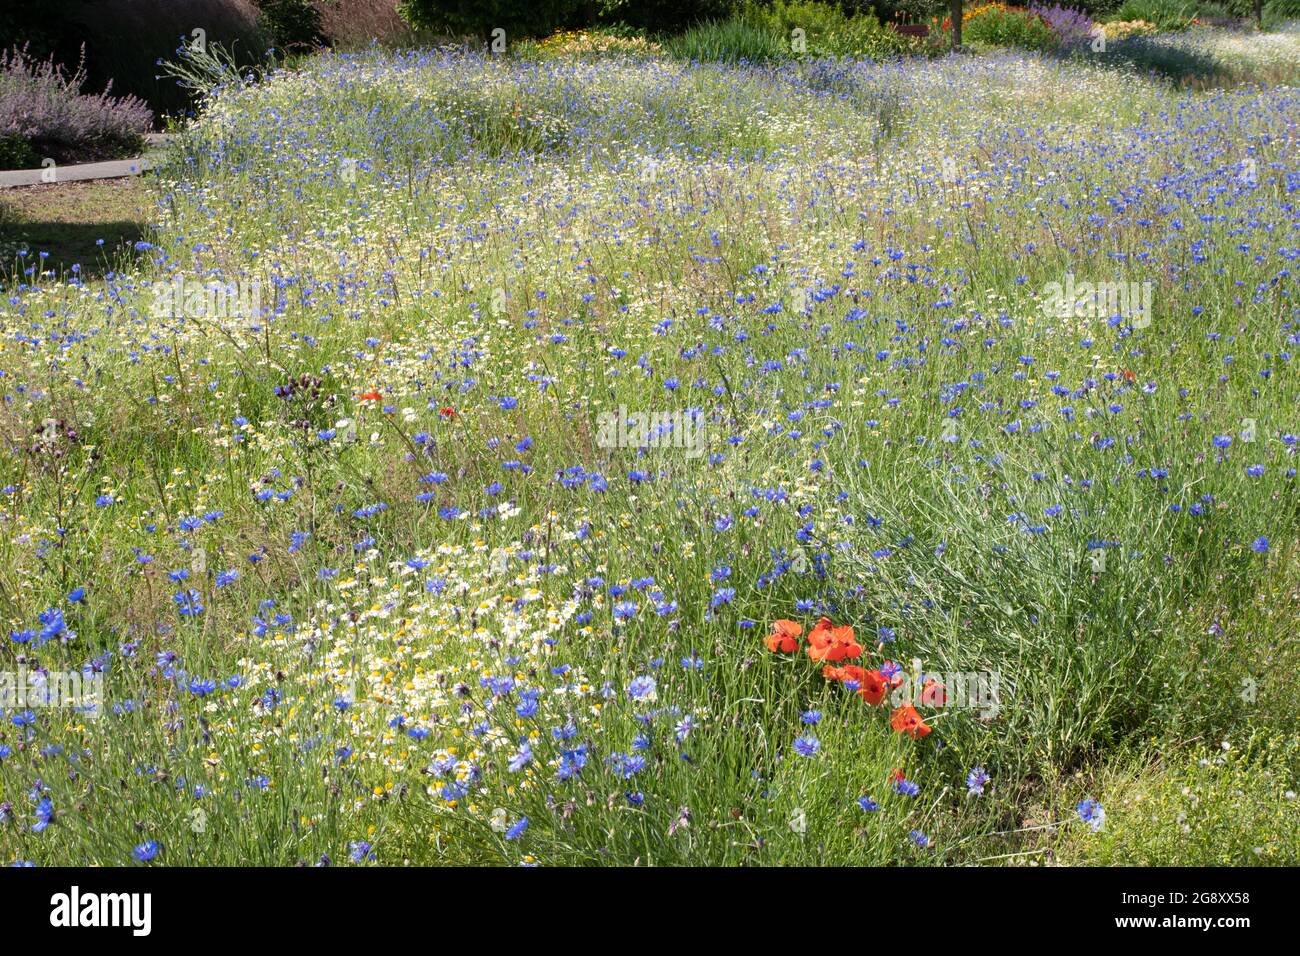 Meadow planting at Breezy Knees gardens Stock Photo